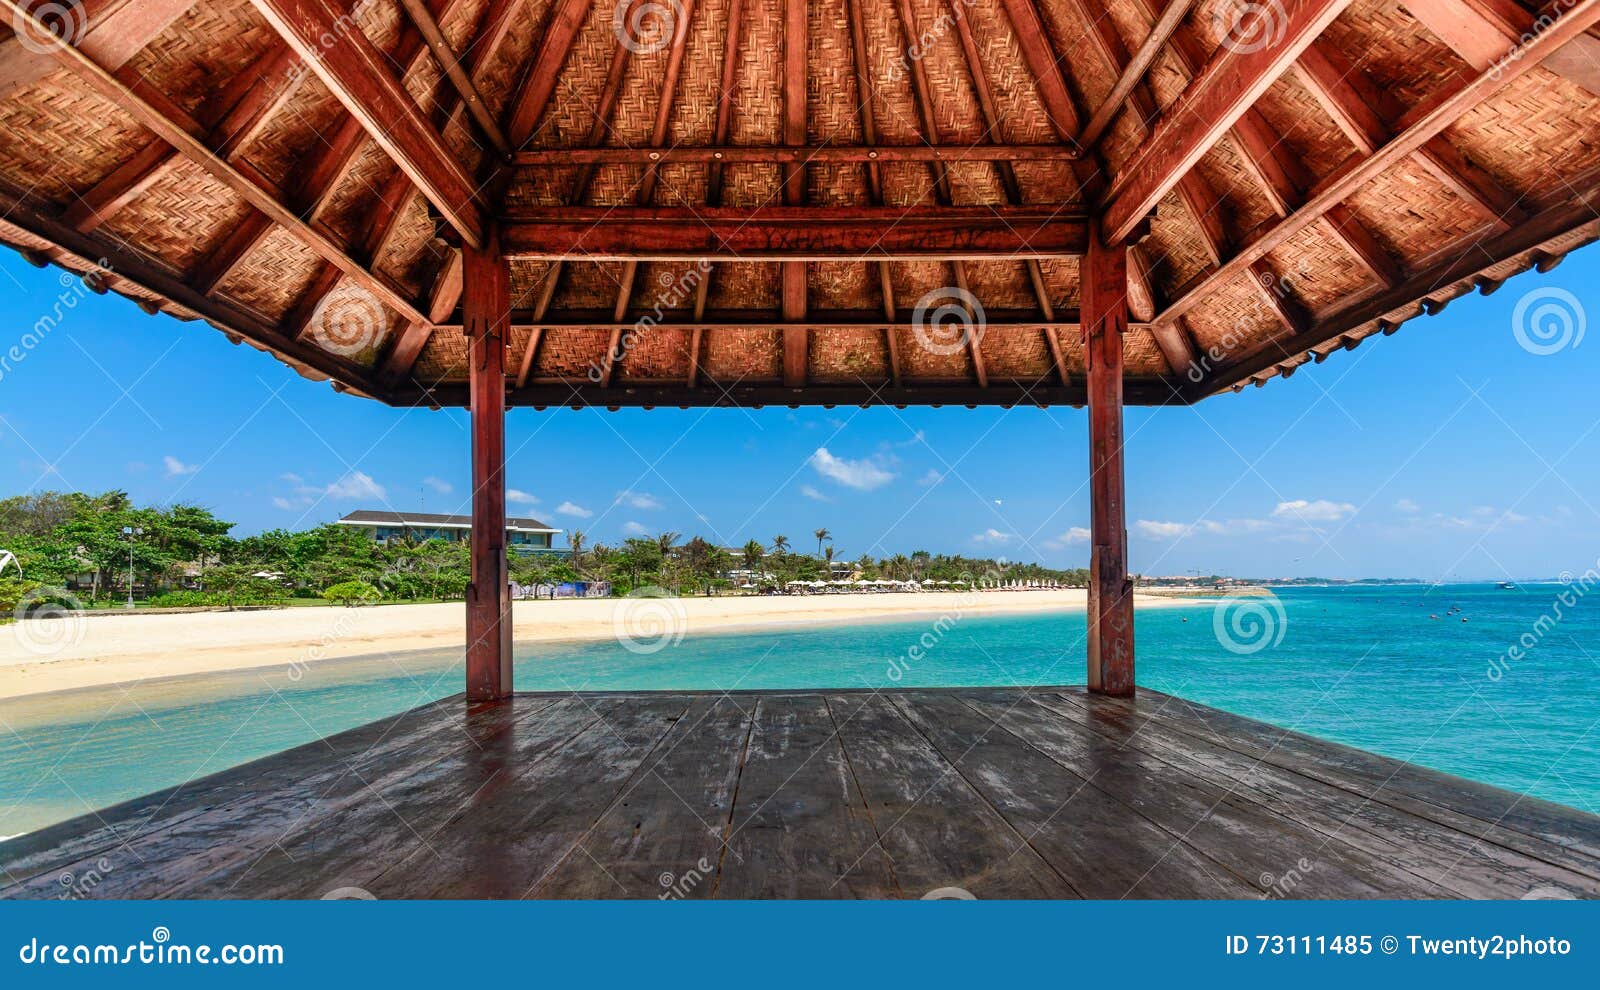 tropical beach hut over the water